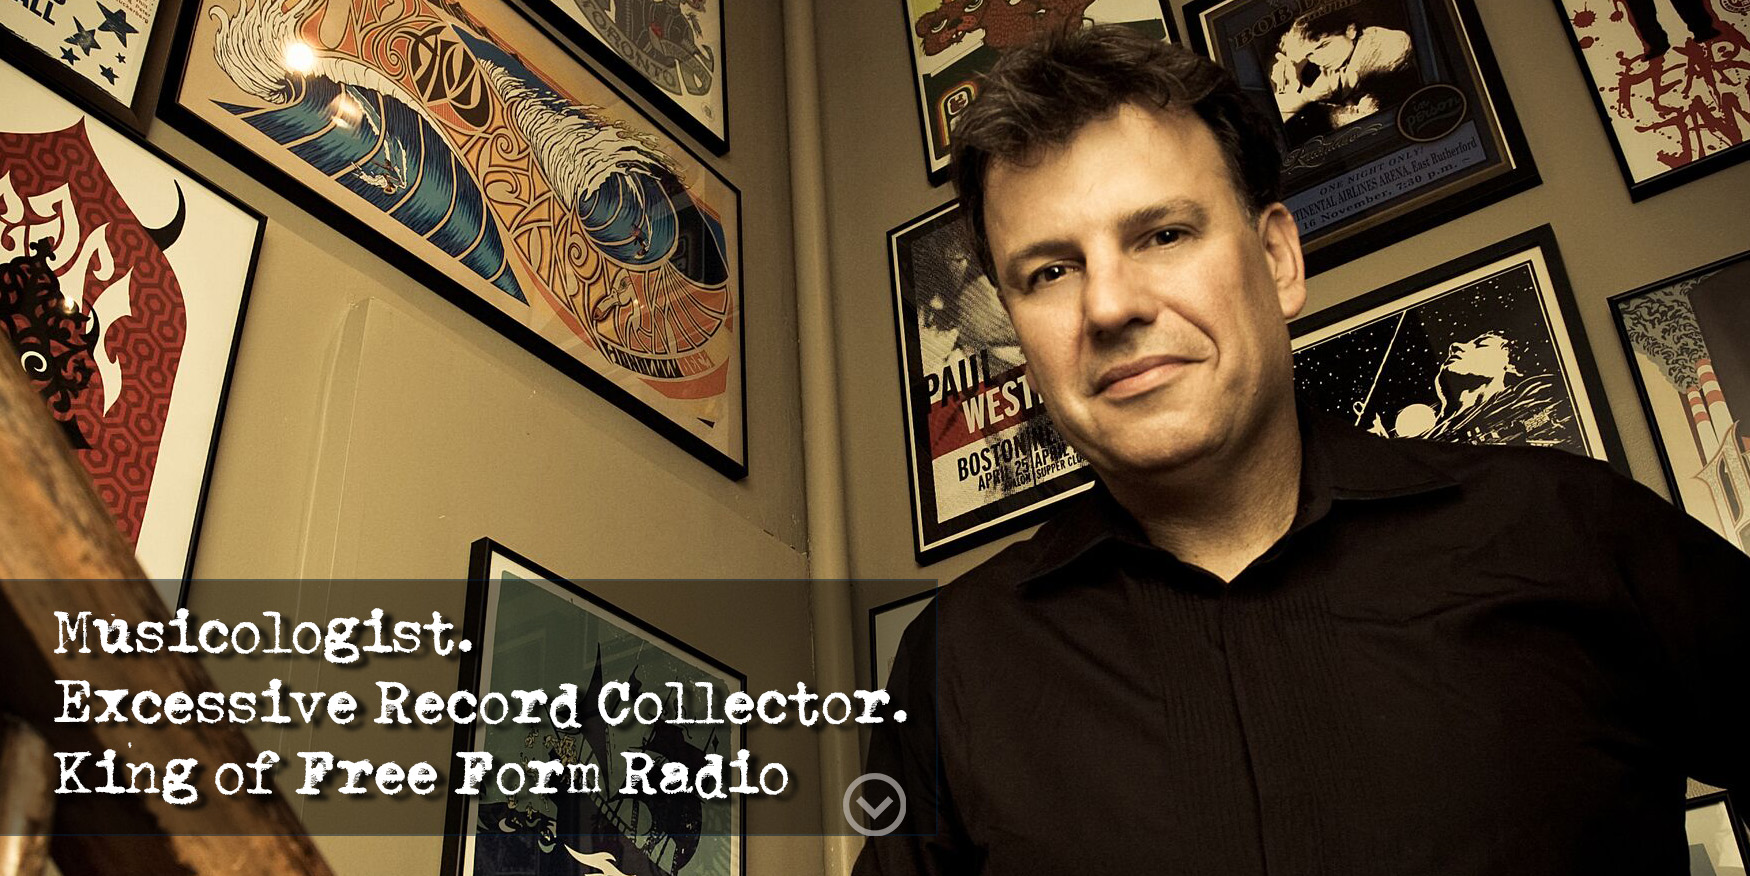 Rich Russo - Musicologist. Excessive Record Collector. King of Free Form Radio